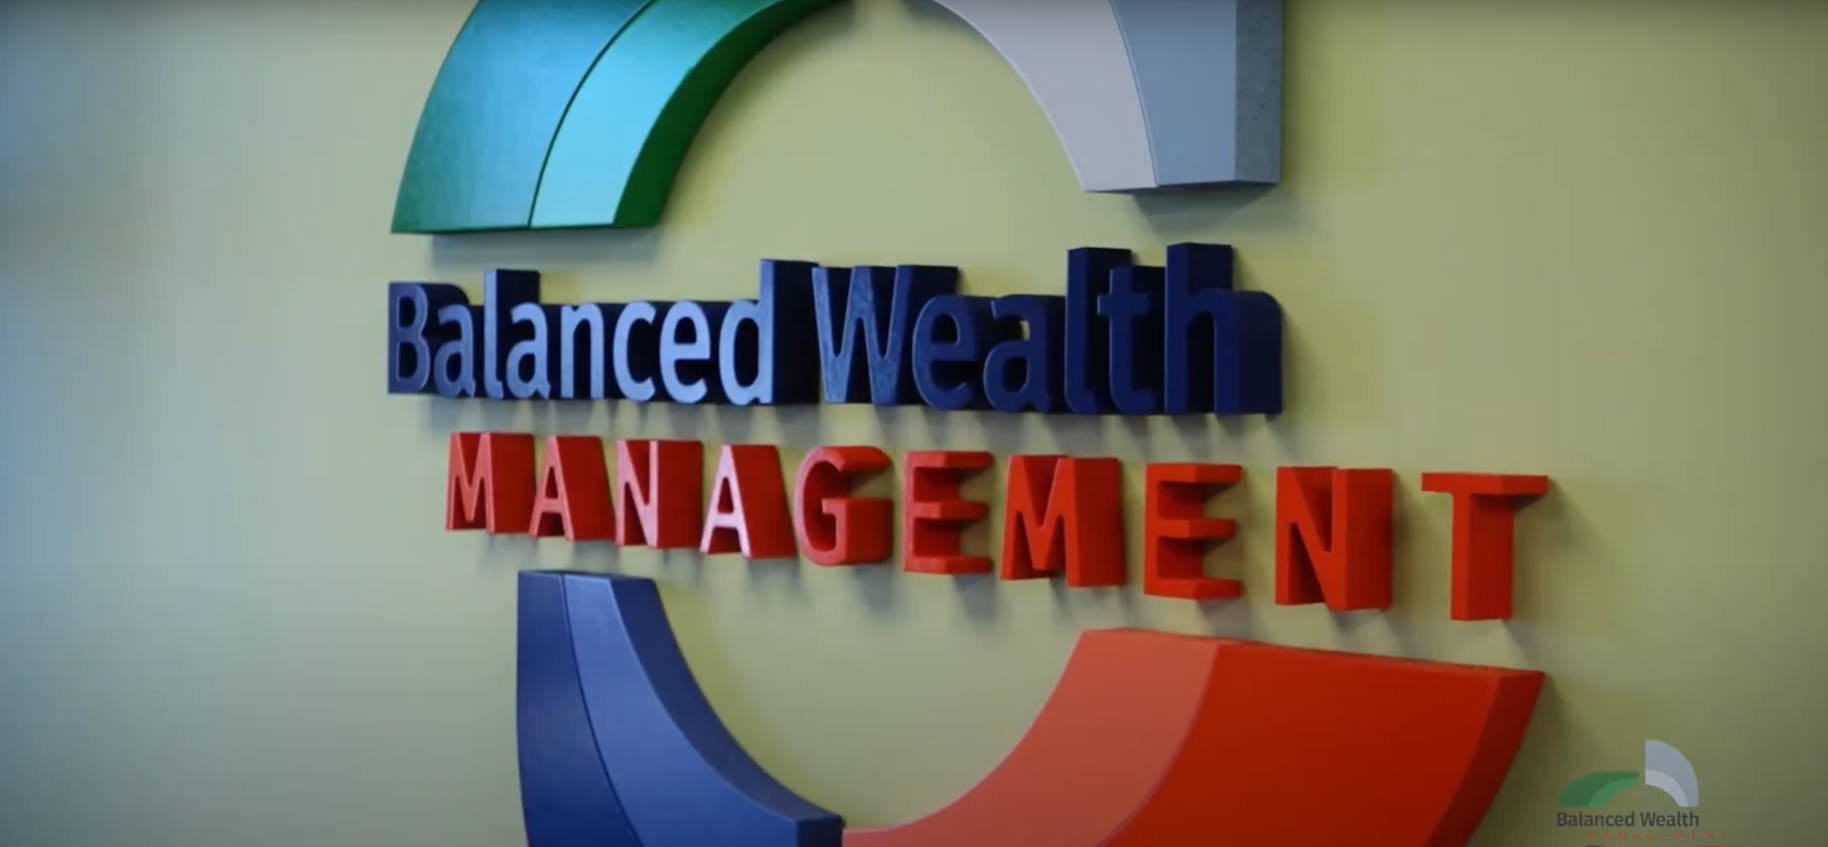 Our Story: Balanced Wealth Management